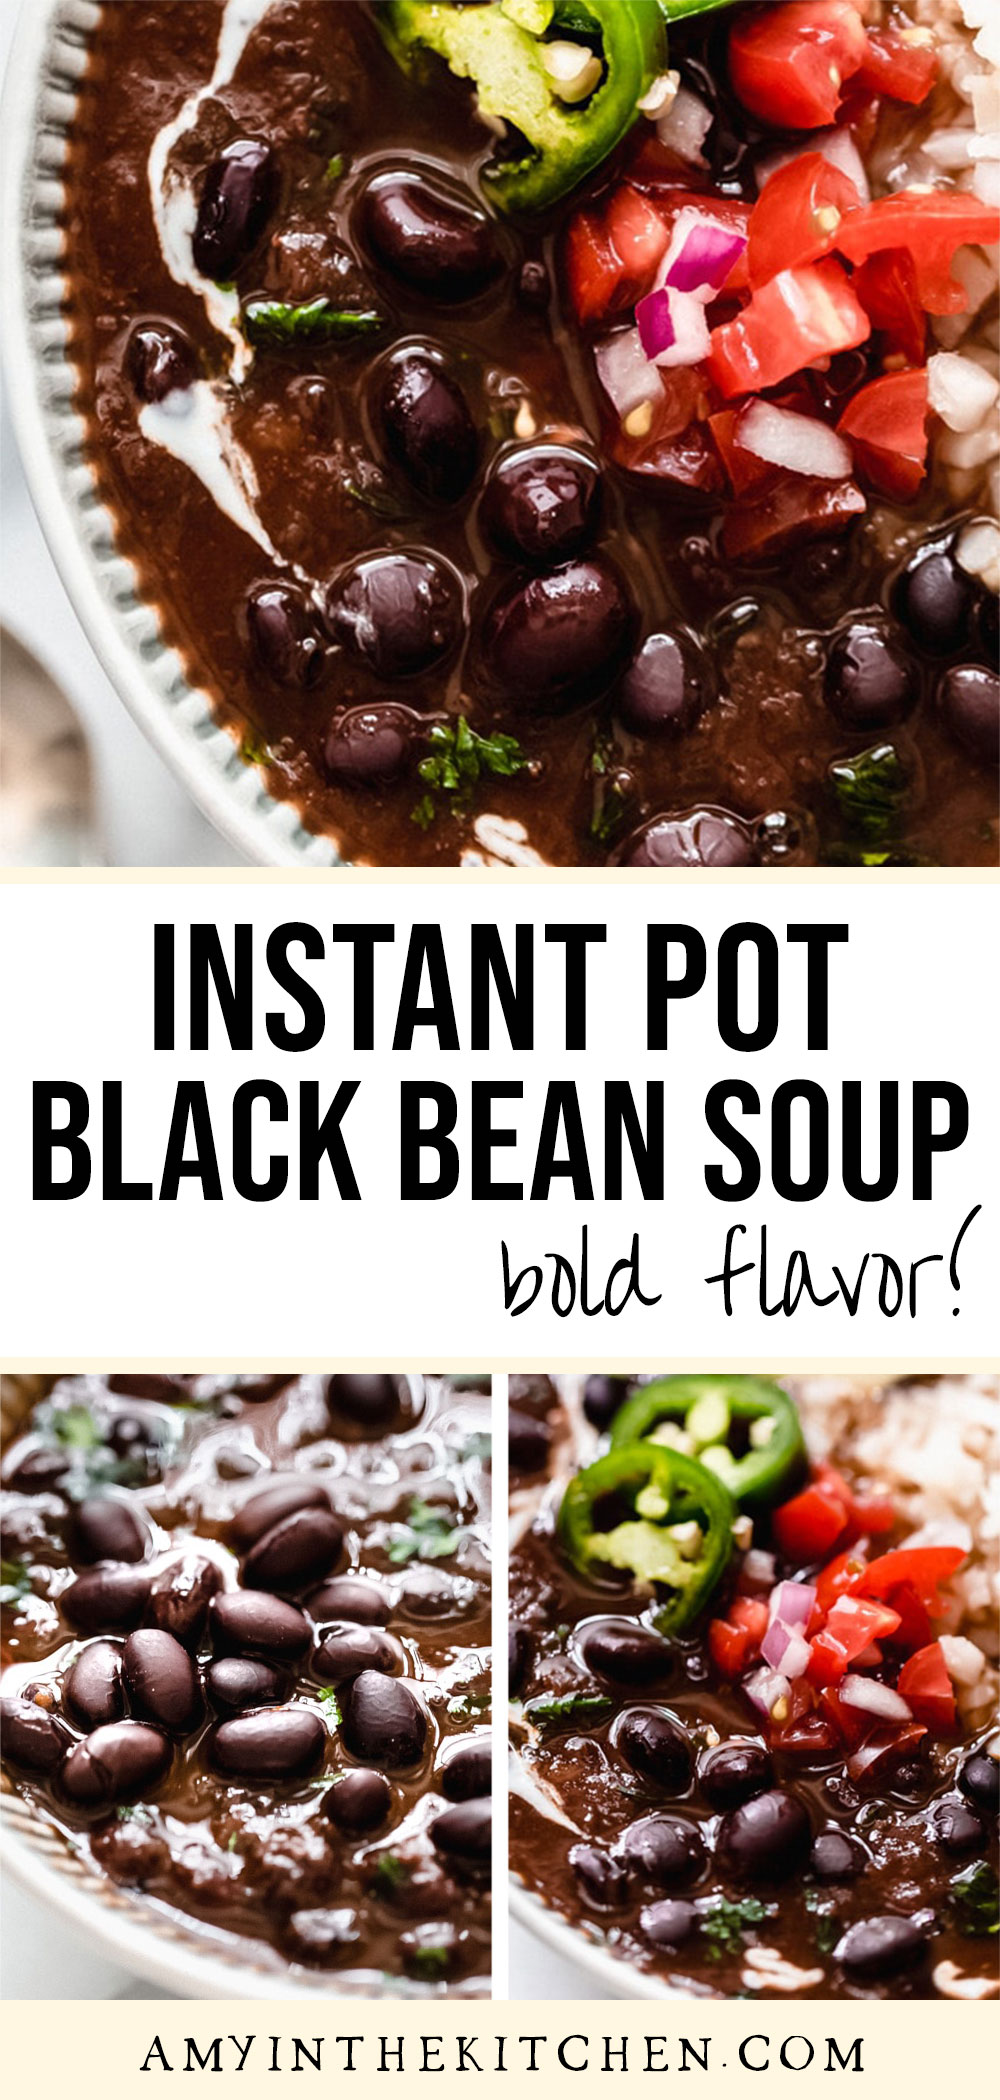 Instant Pot Black Bean Soup Recipe | Amy in the Kitchen